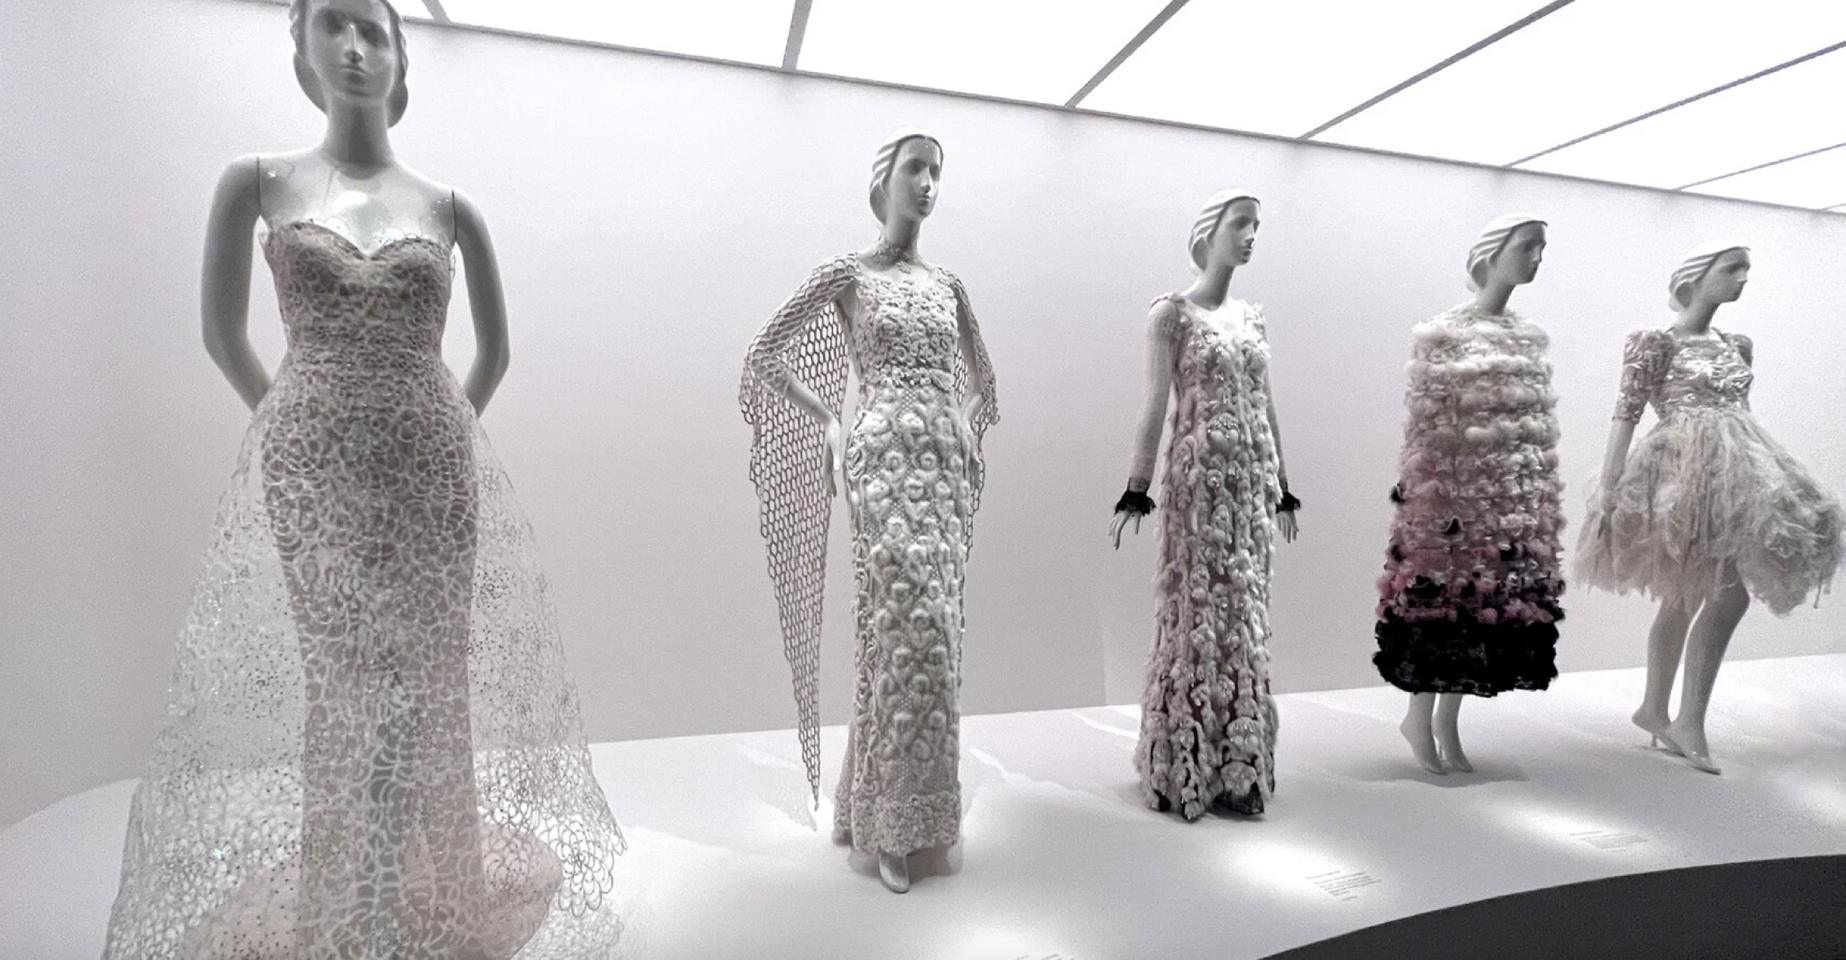 Get your first look at the Met exhibit on Karl Lagerfeld